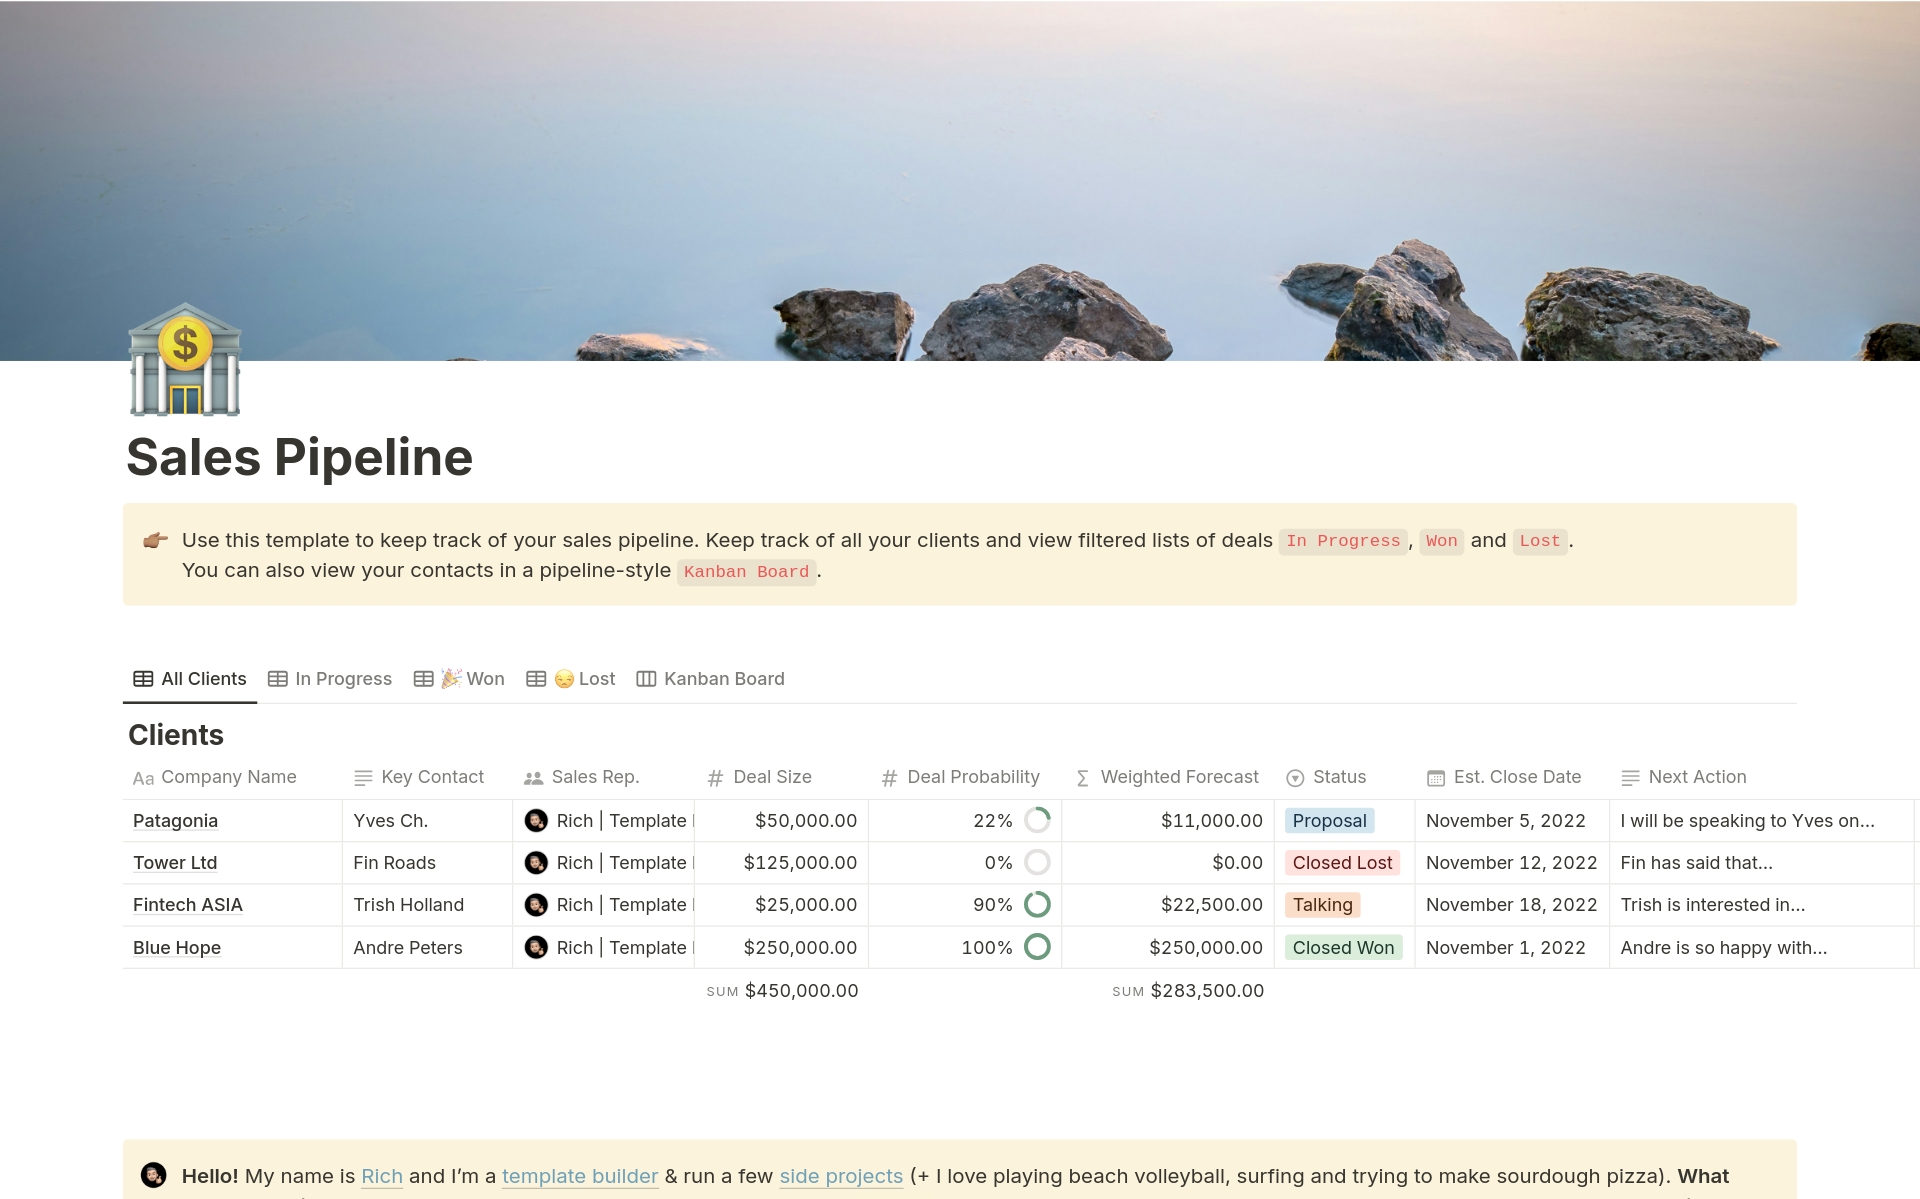 Use this template to keep track of your sales pipeline in Notion.